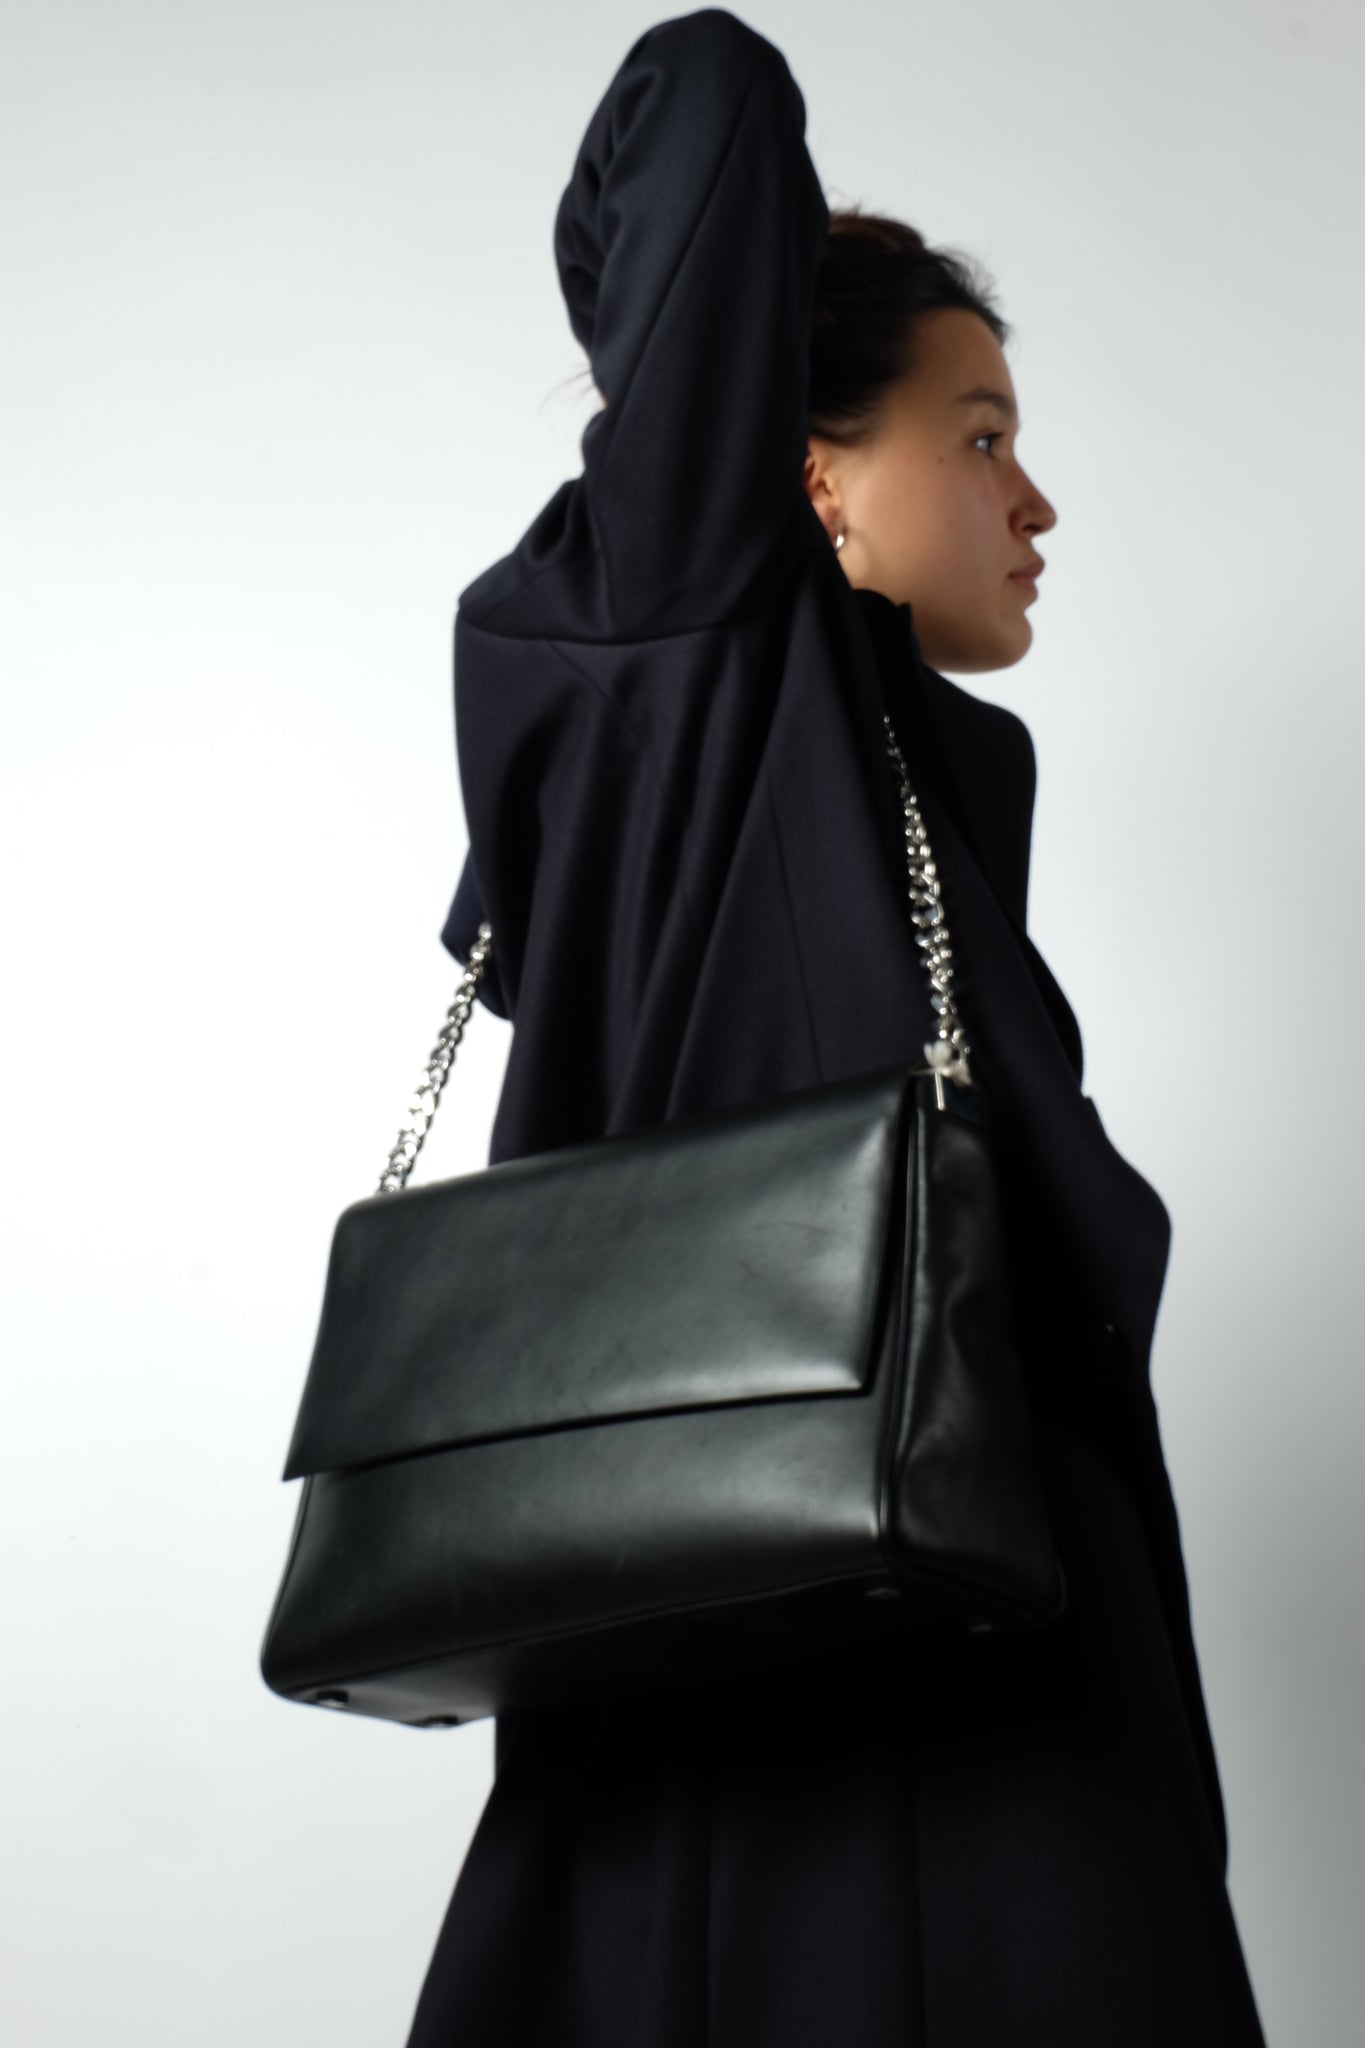 CHAIN BAG IN BLACK PATENT LEATHER